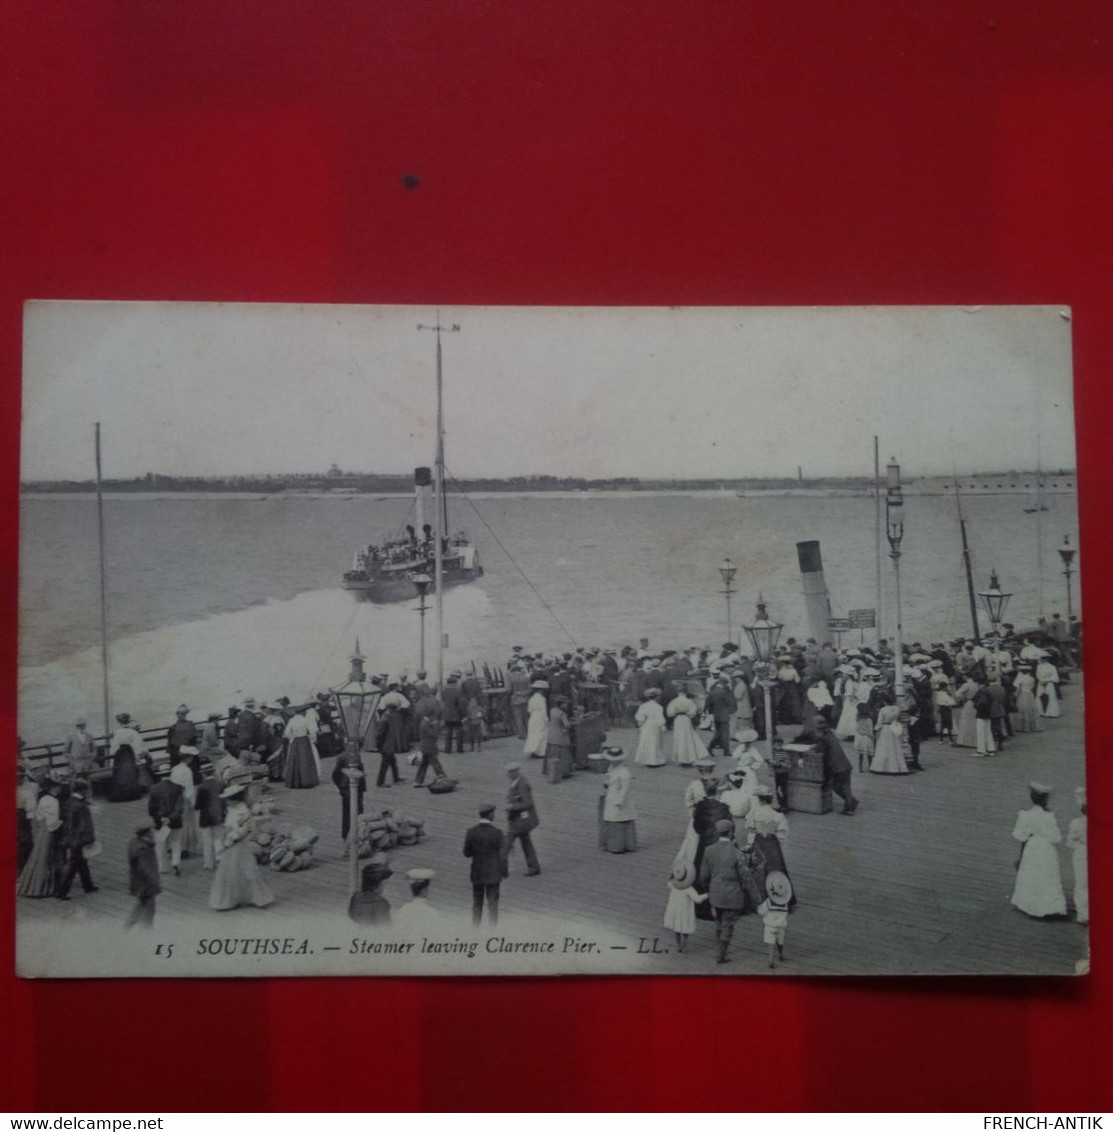 SOUTHSEA STEAMER LEAVING CLARENCE PIER - Southsea